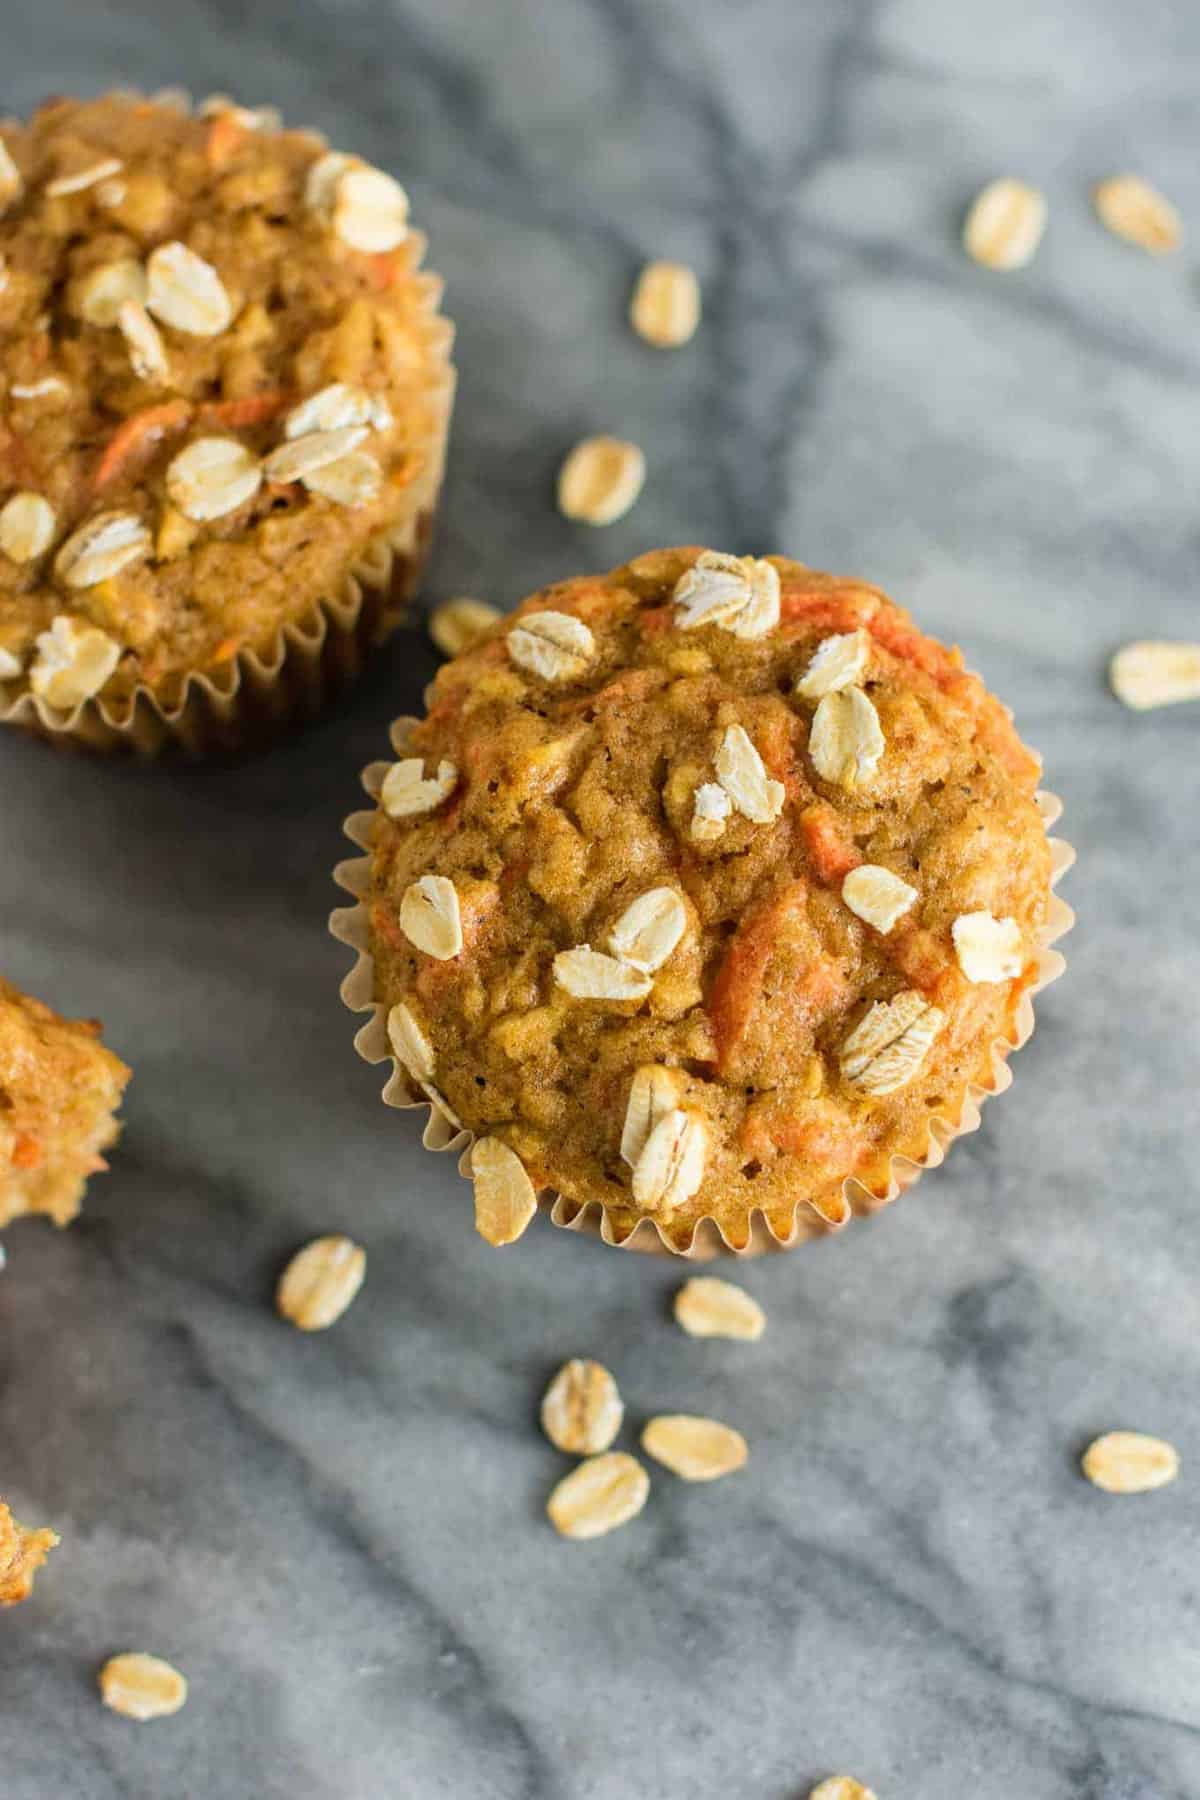 Wholesome Carrot Apple Muffins made with pure maple syrup and greek yogurt. Kids will love these! A feel good breakfast or snack for the whole family. (oil free, naturally sweetened) #carrotapplemuffins #healthymuffins #healthysnack #kidfriendlysnack #greekyogurt #vegetarian